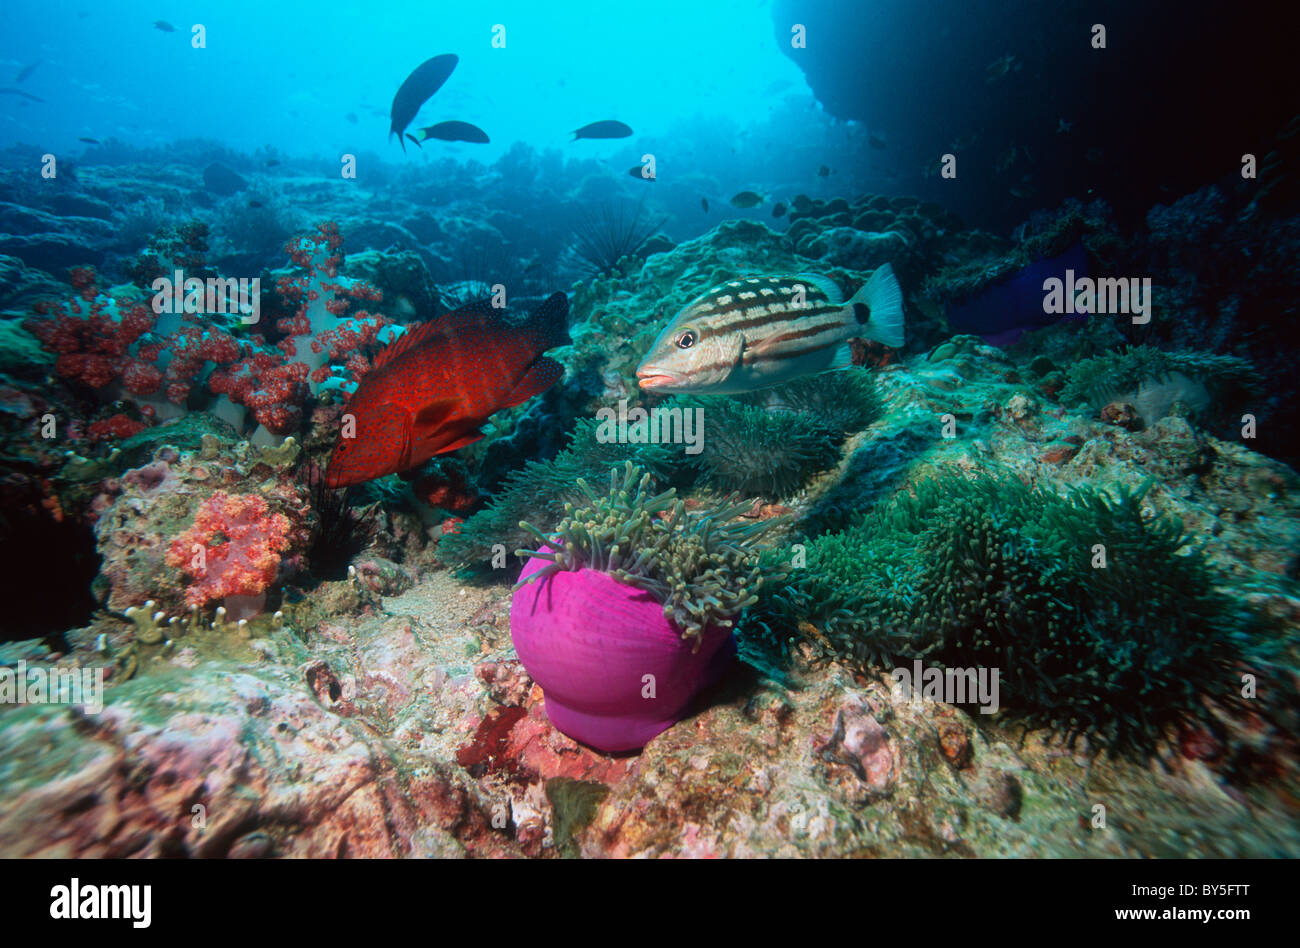 Checkered snapper (Lutjanus decussatus) and Coral hind (Cephalopholis minata) on coral reef with anemones and soft corals. Stock Photo